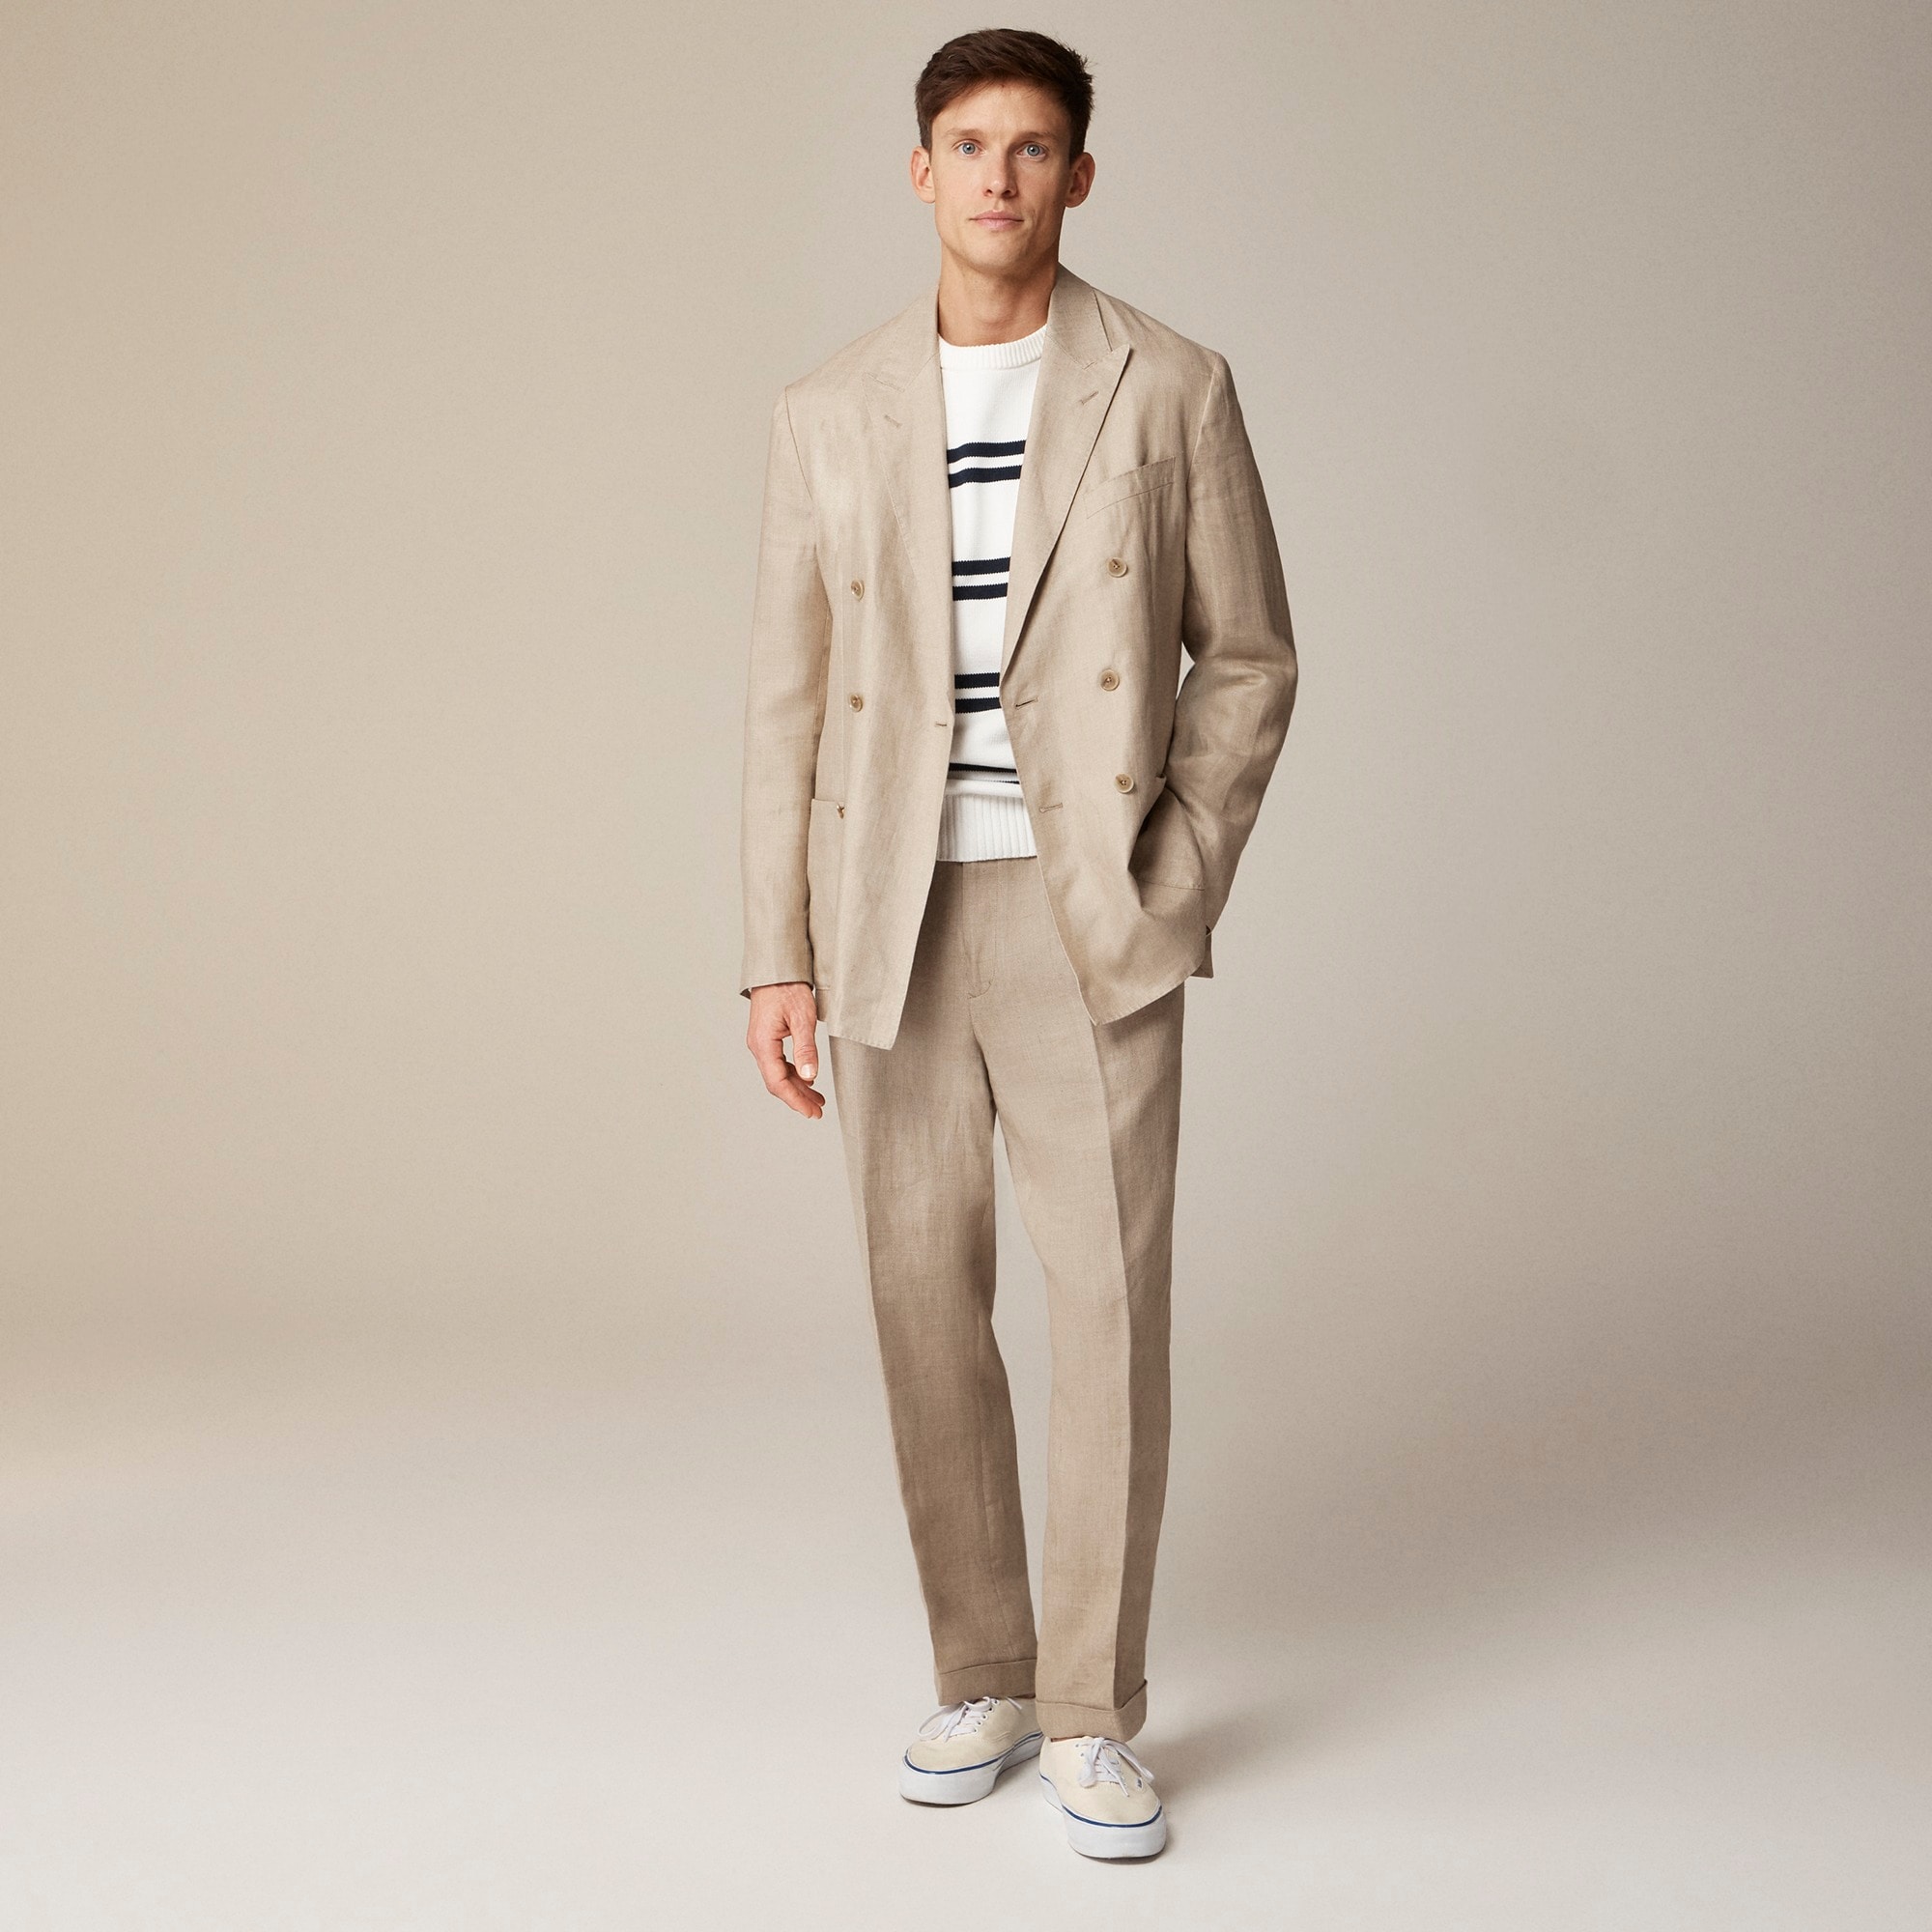 j.crew: crosby classic-fit double-breasted unstructured suit jacket in linen blend for men